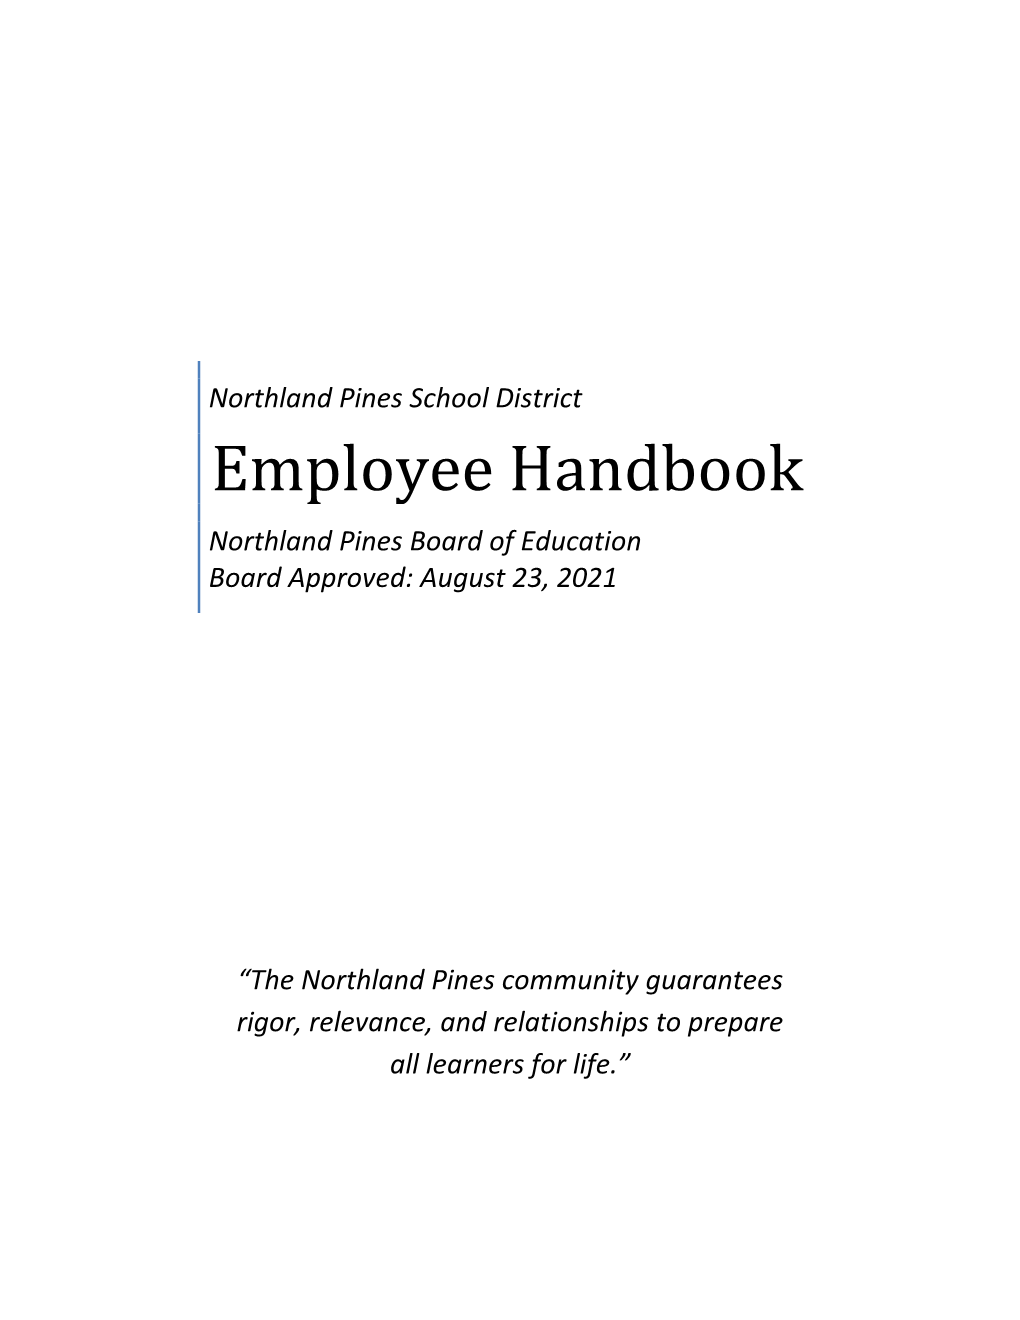 Northland Pines School District Employee Handbook Northland Pines Board of Education Board Approved: August 23, 2021